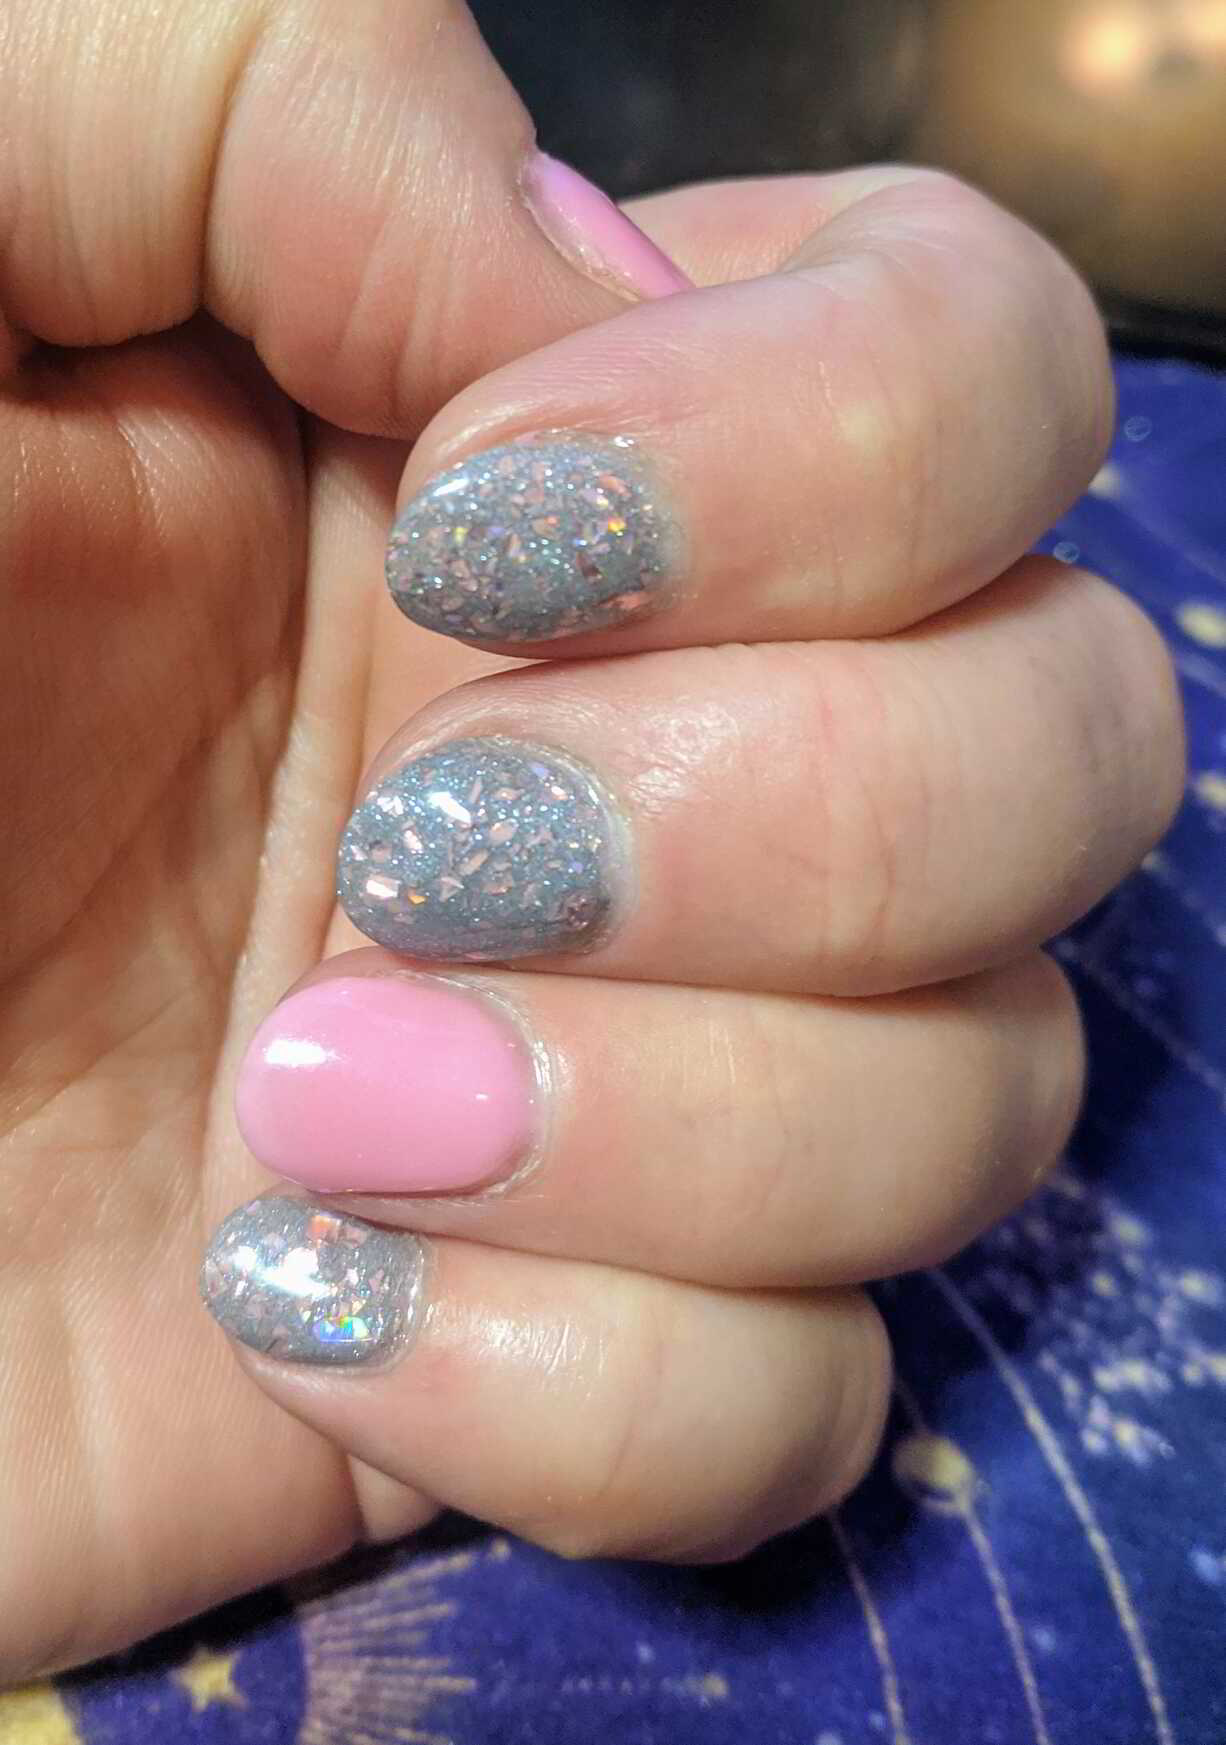 Nail polish manicure of shade Sparkle and Co. Earl Grey All Day, Sparkle and Co. Girl Power